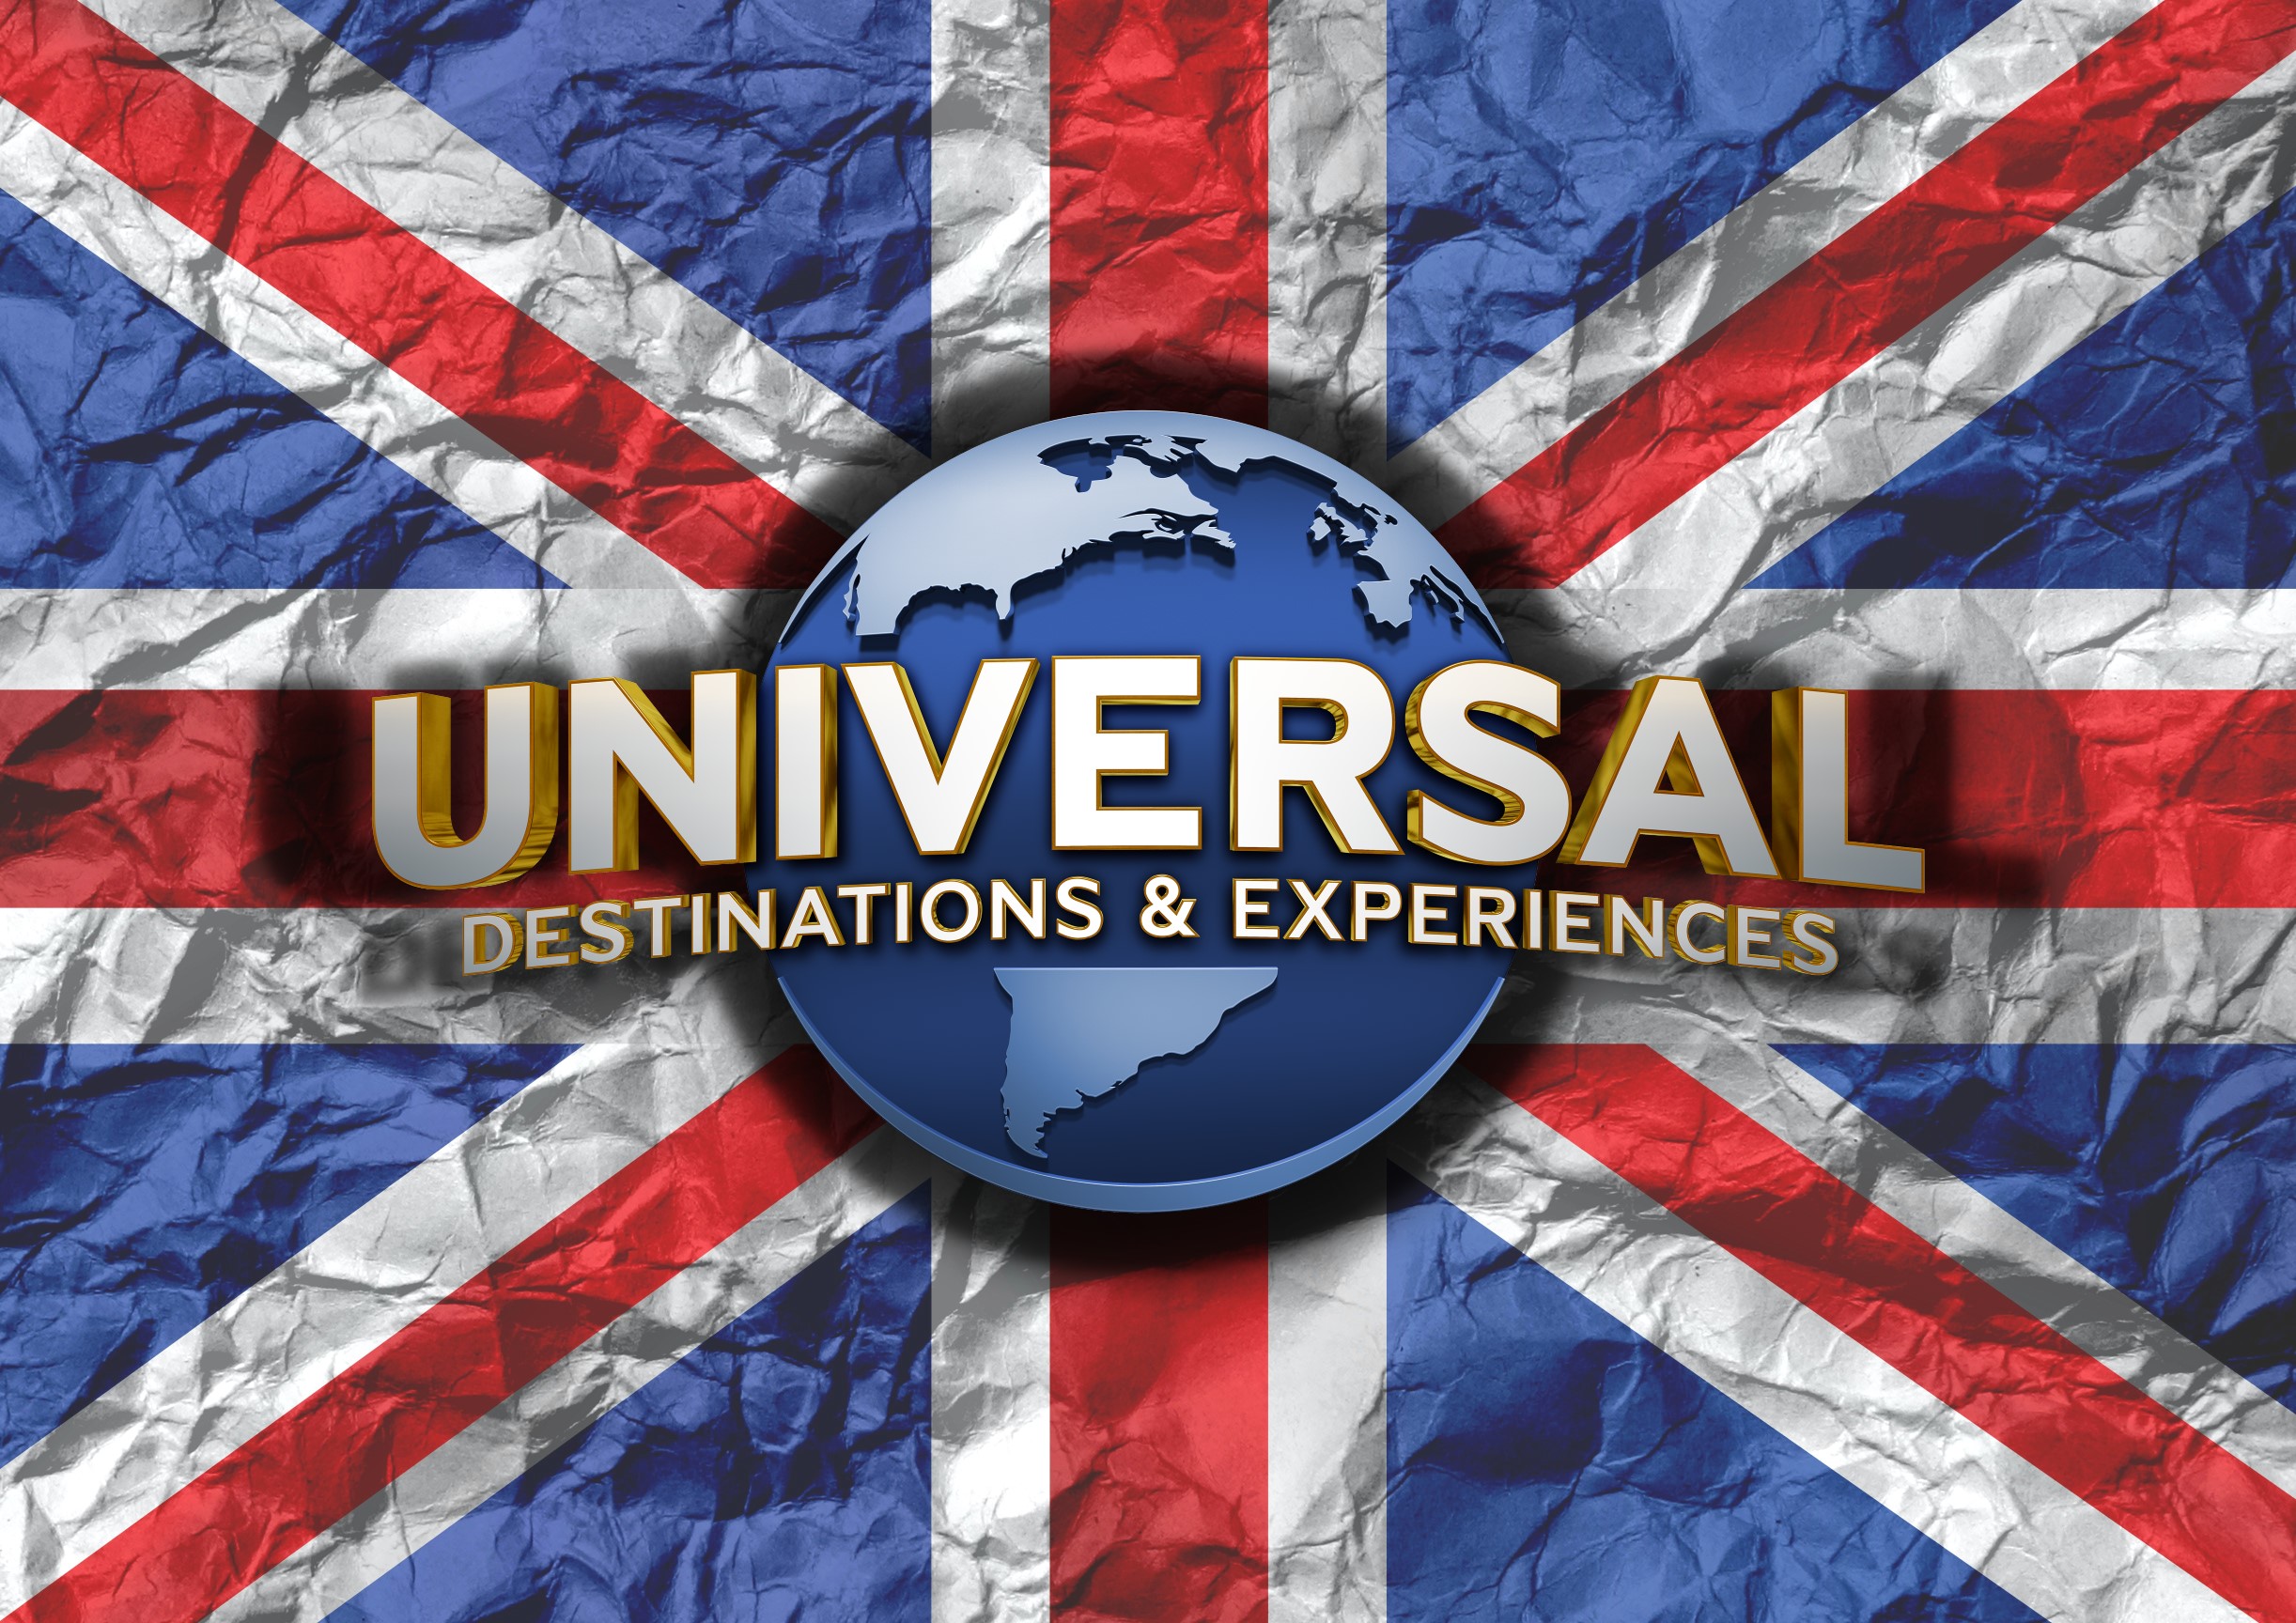 Universal Pictures UK